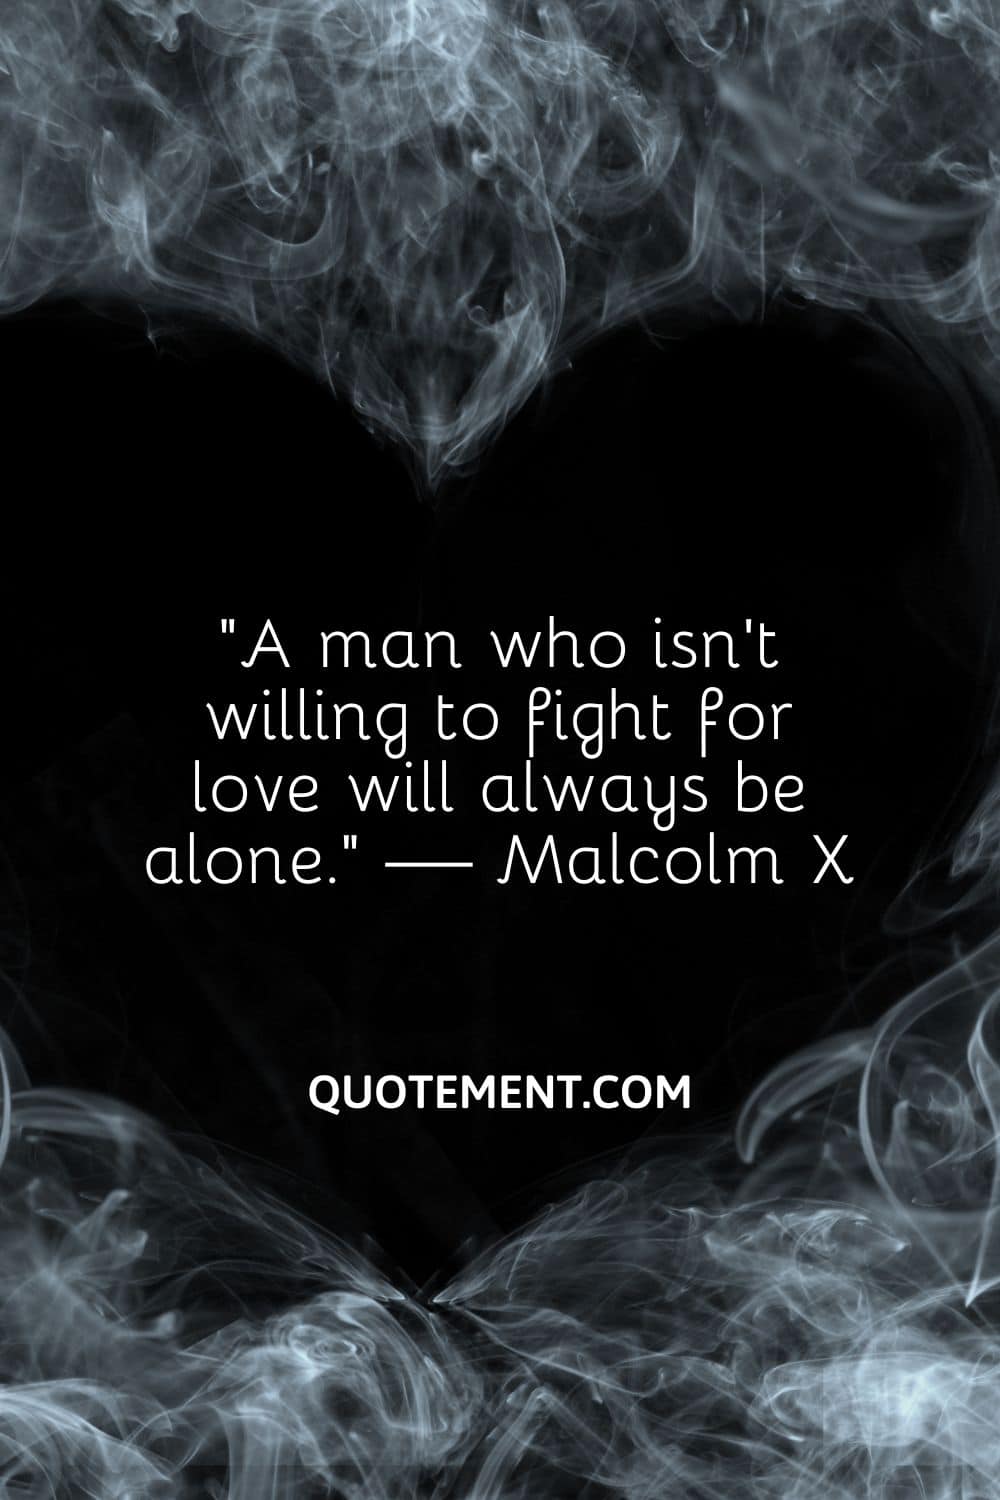 A man who isn’t willing to fight for love will always be alone